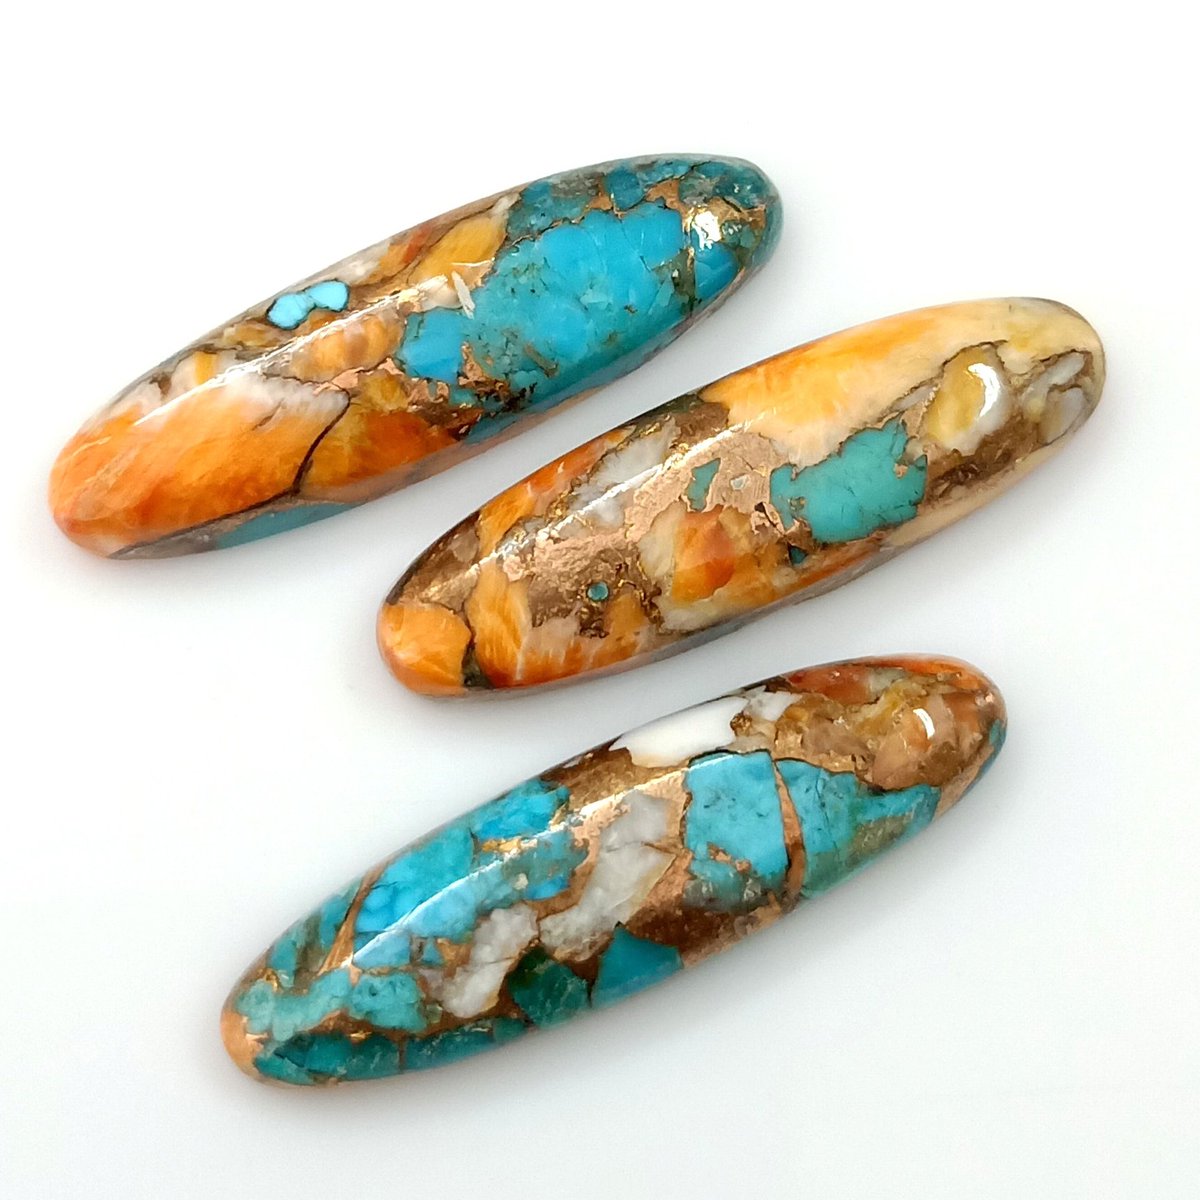 Oyster Copper Turquoise
#turquoise #copperturquoise #oysterturquoise #gemstonelover #cabochonforsale